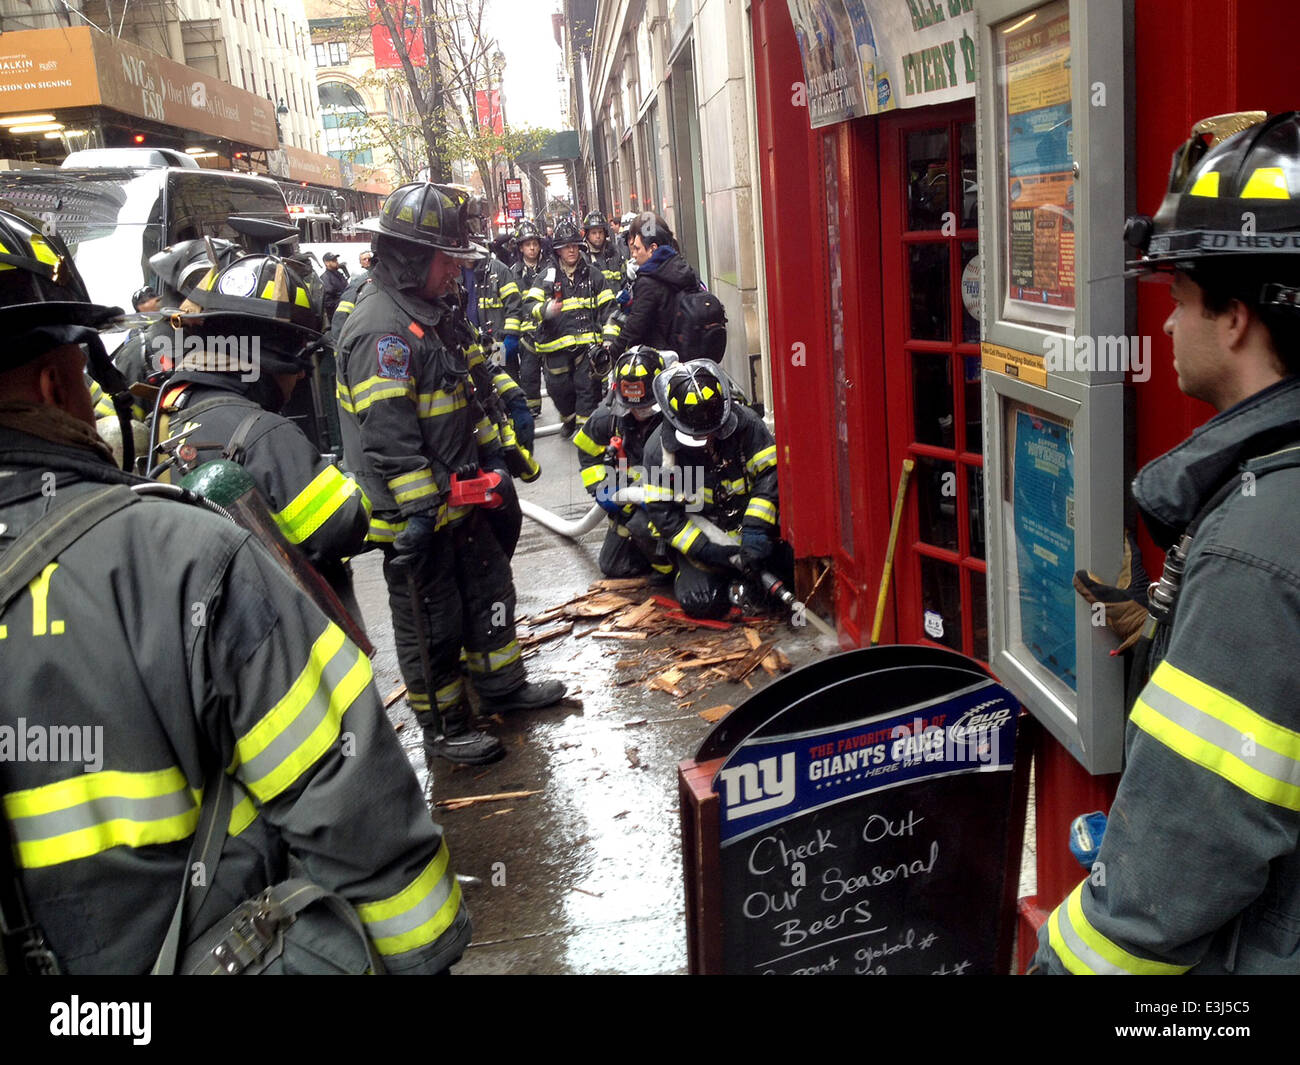 Members of the FDNY respond to a call of a small fire that broke out at Foley's NY, the famed midtown pub and restaurant across the street from the Empire State Building  Where: New York City, United States When: 26 Nov 2013 Stock Photo